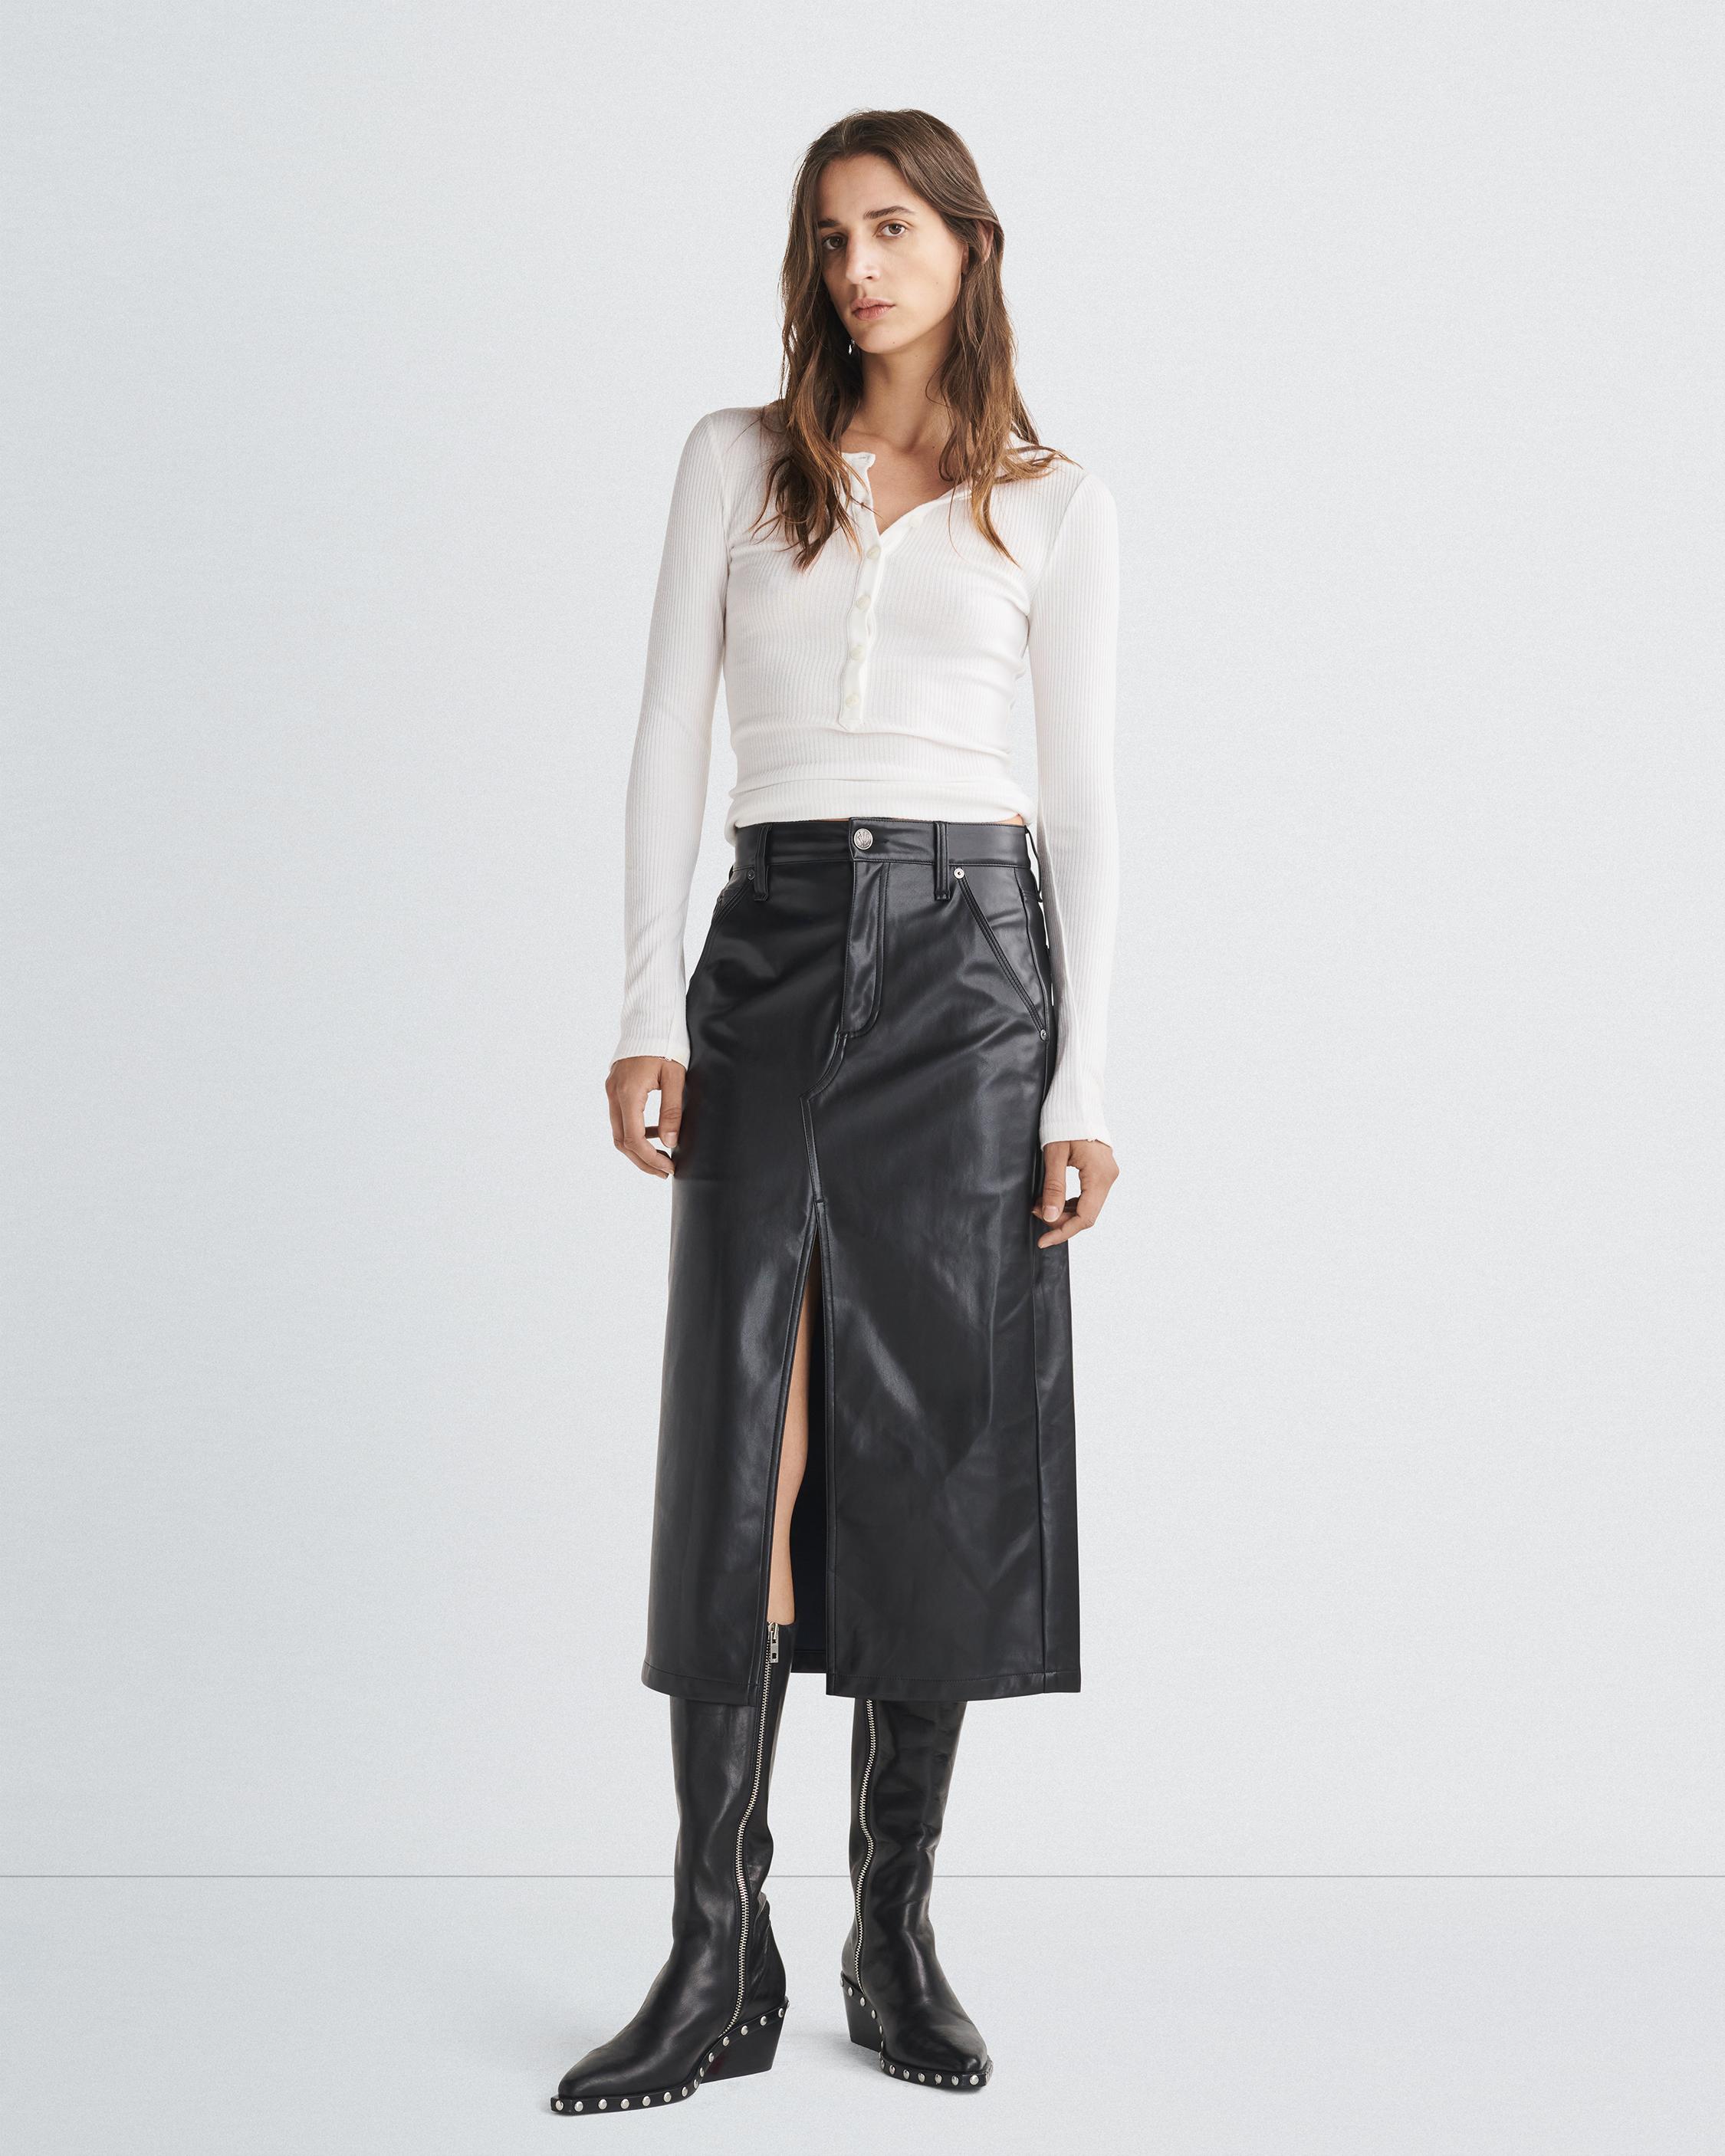 Flared faux-leather skirt, Contemporaine